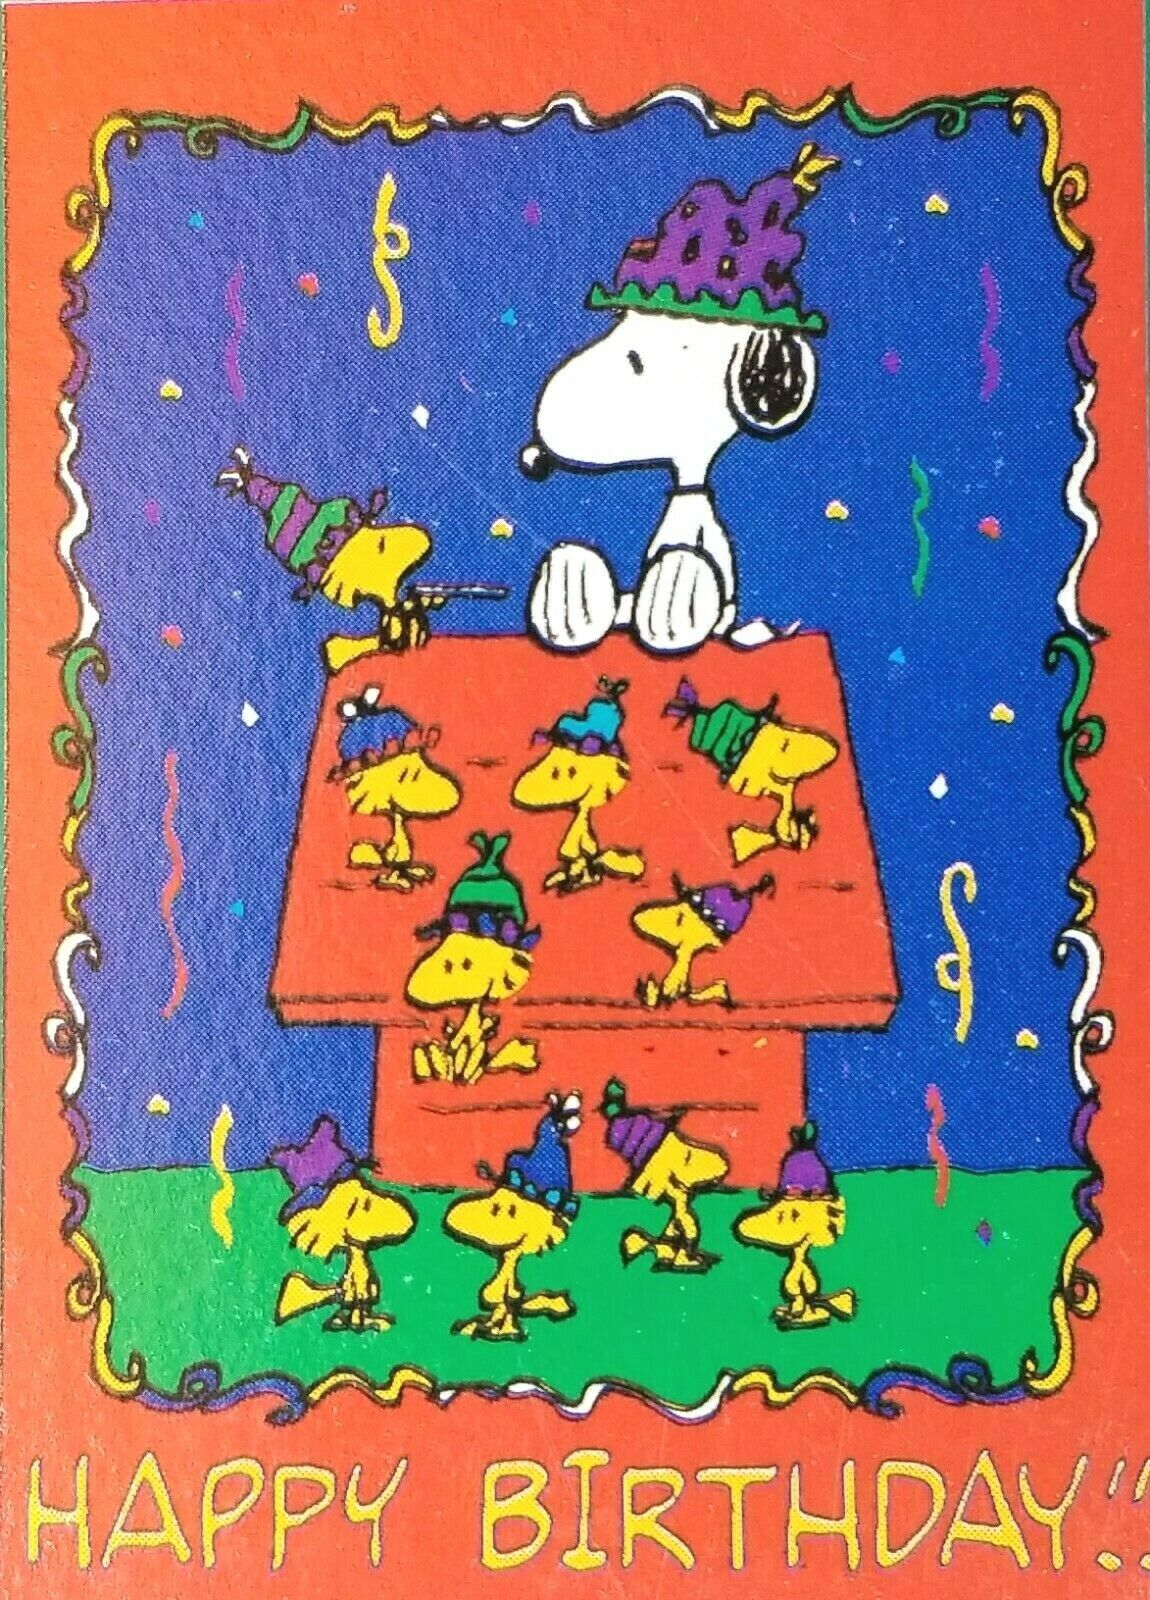 Snoopy Woodstock Peanuts Happy Birthday Party 29 1 2 X 41 Decorative Flag NWTS Online